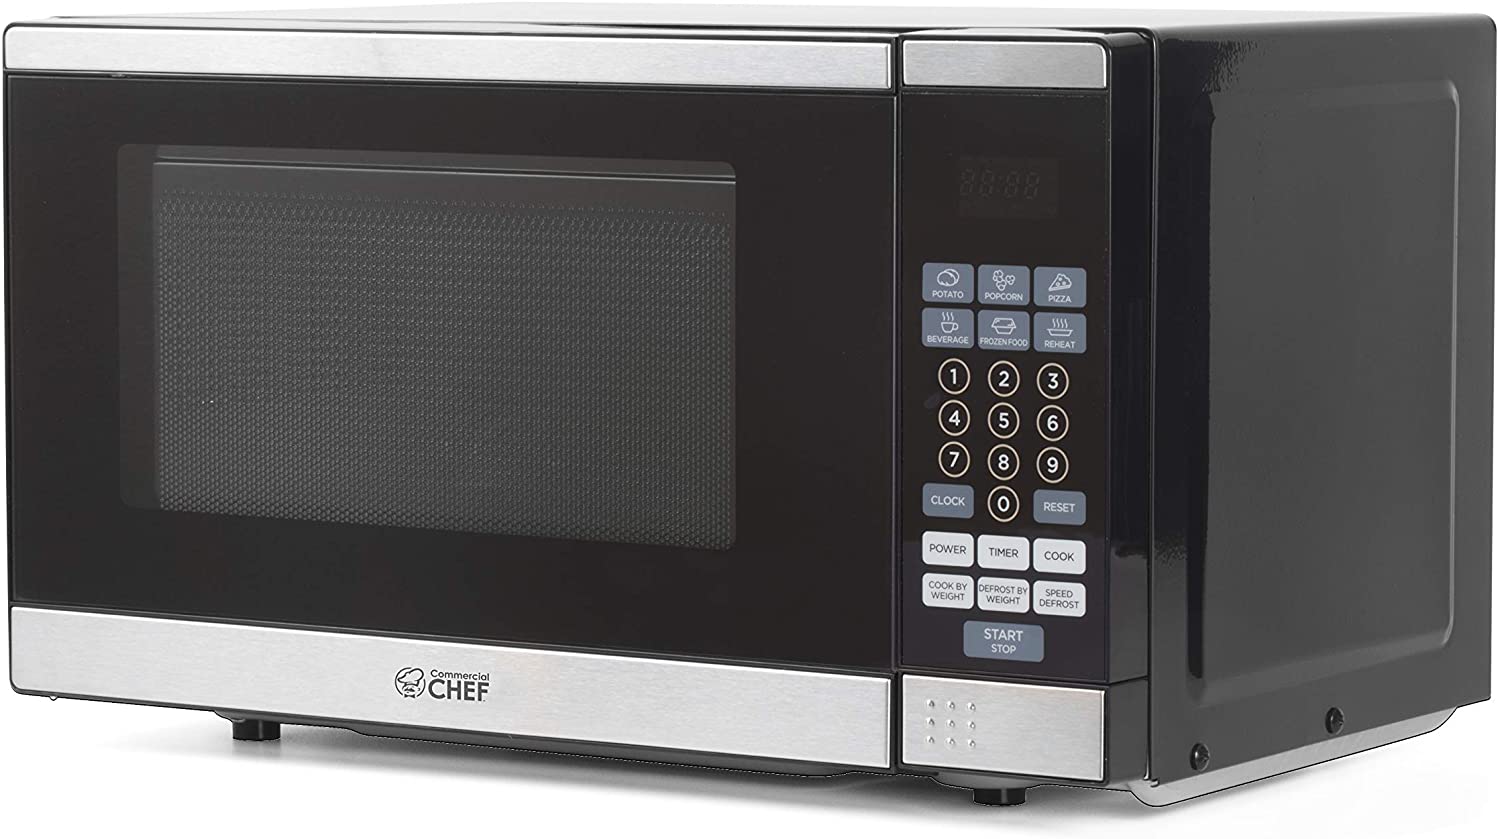 https://bakingreview.com/wp-content/uploads/2021/05/Commercial-Chef-CHM770SS-Review.jpg